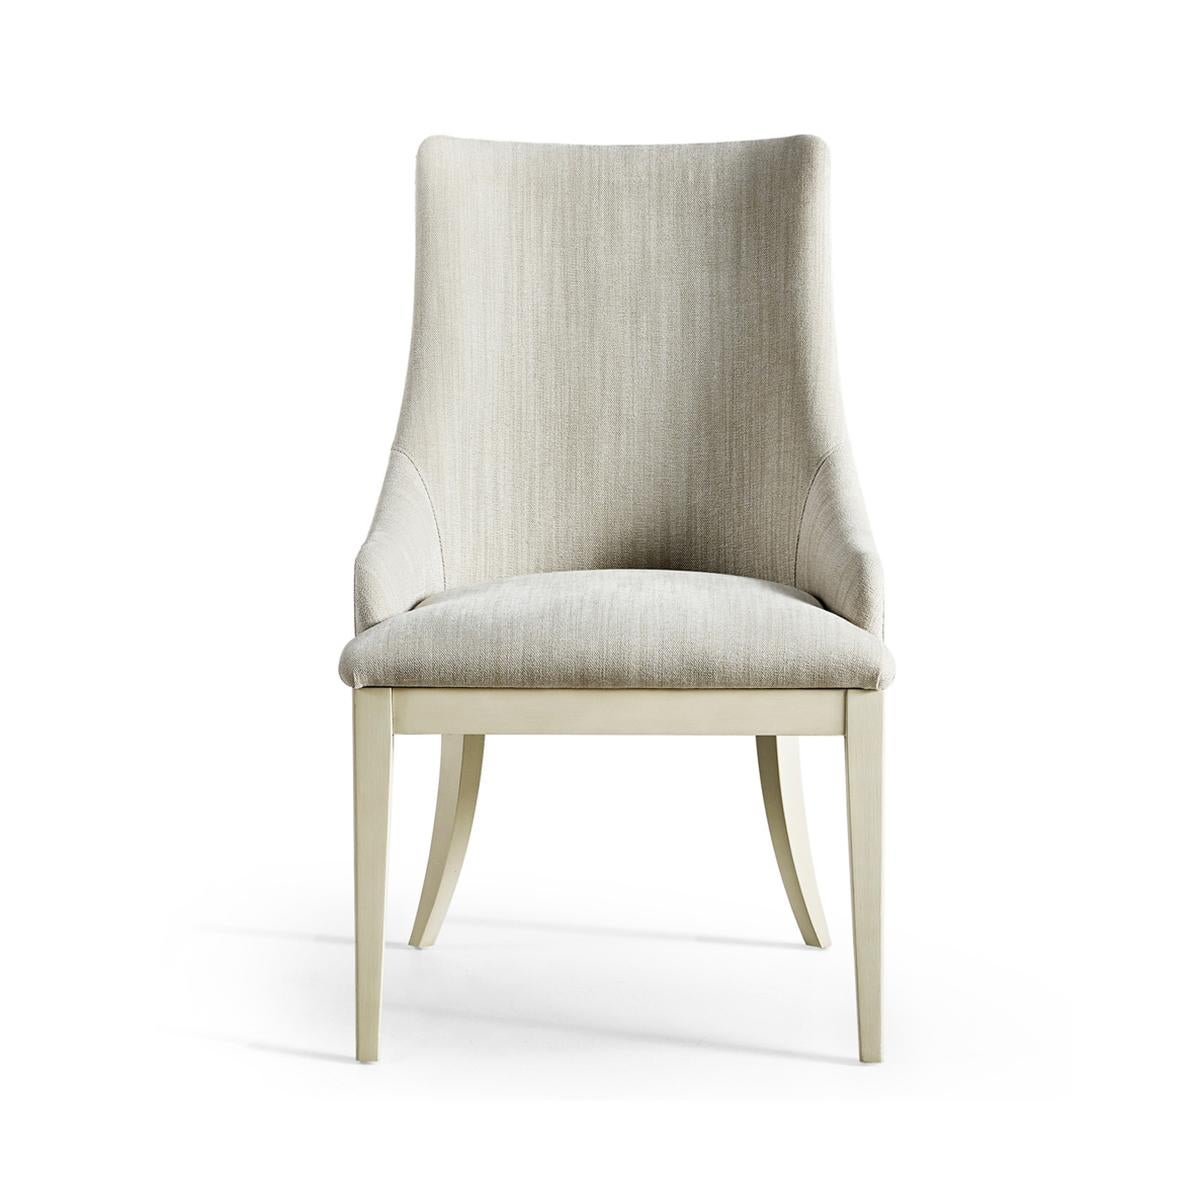 Mid-Century Modern upholstered side chair is perfectly proportioned, exuding timeless elegance and modern sophistication. With a gently sloping back fully upholstered in pristine performance fabric, offering unparalleled refinement.

A lightly